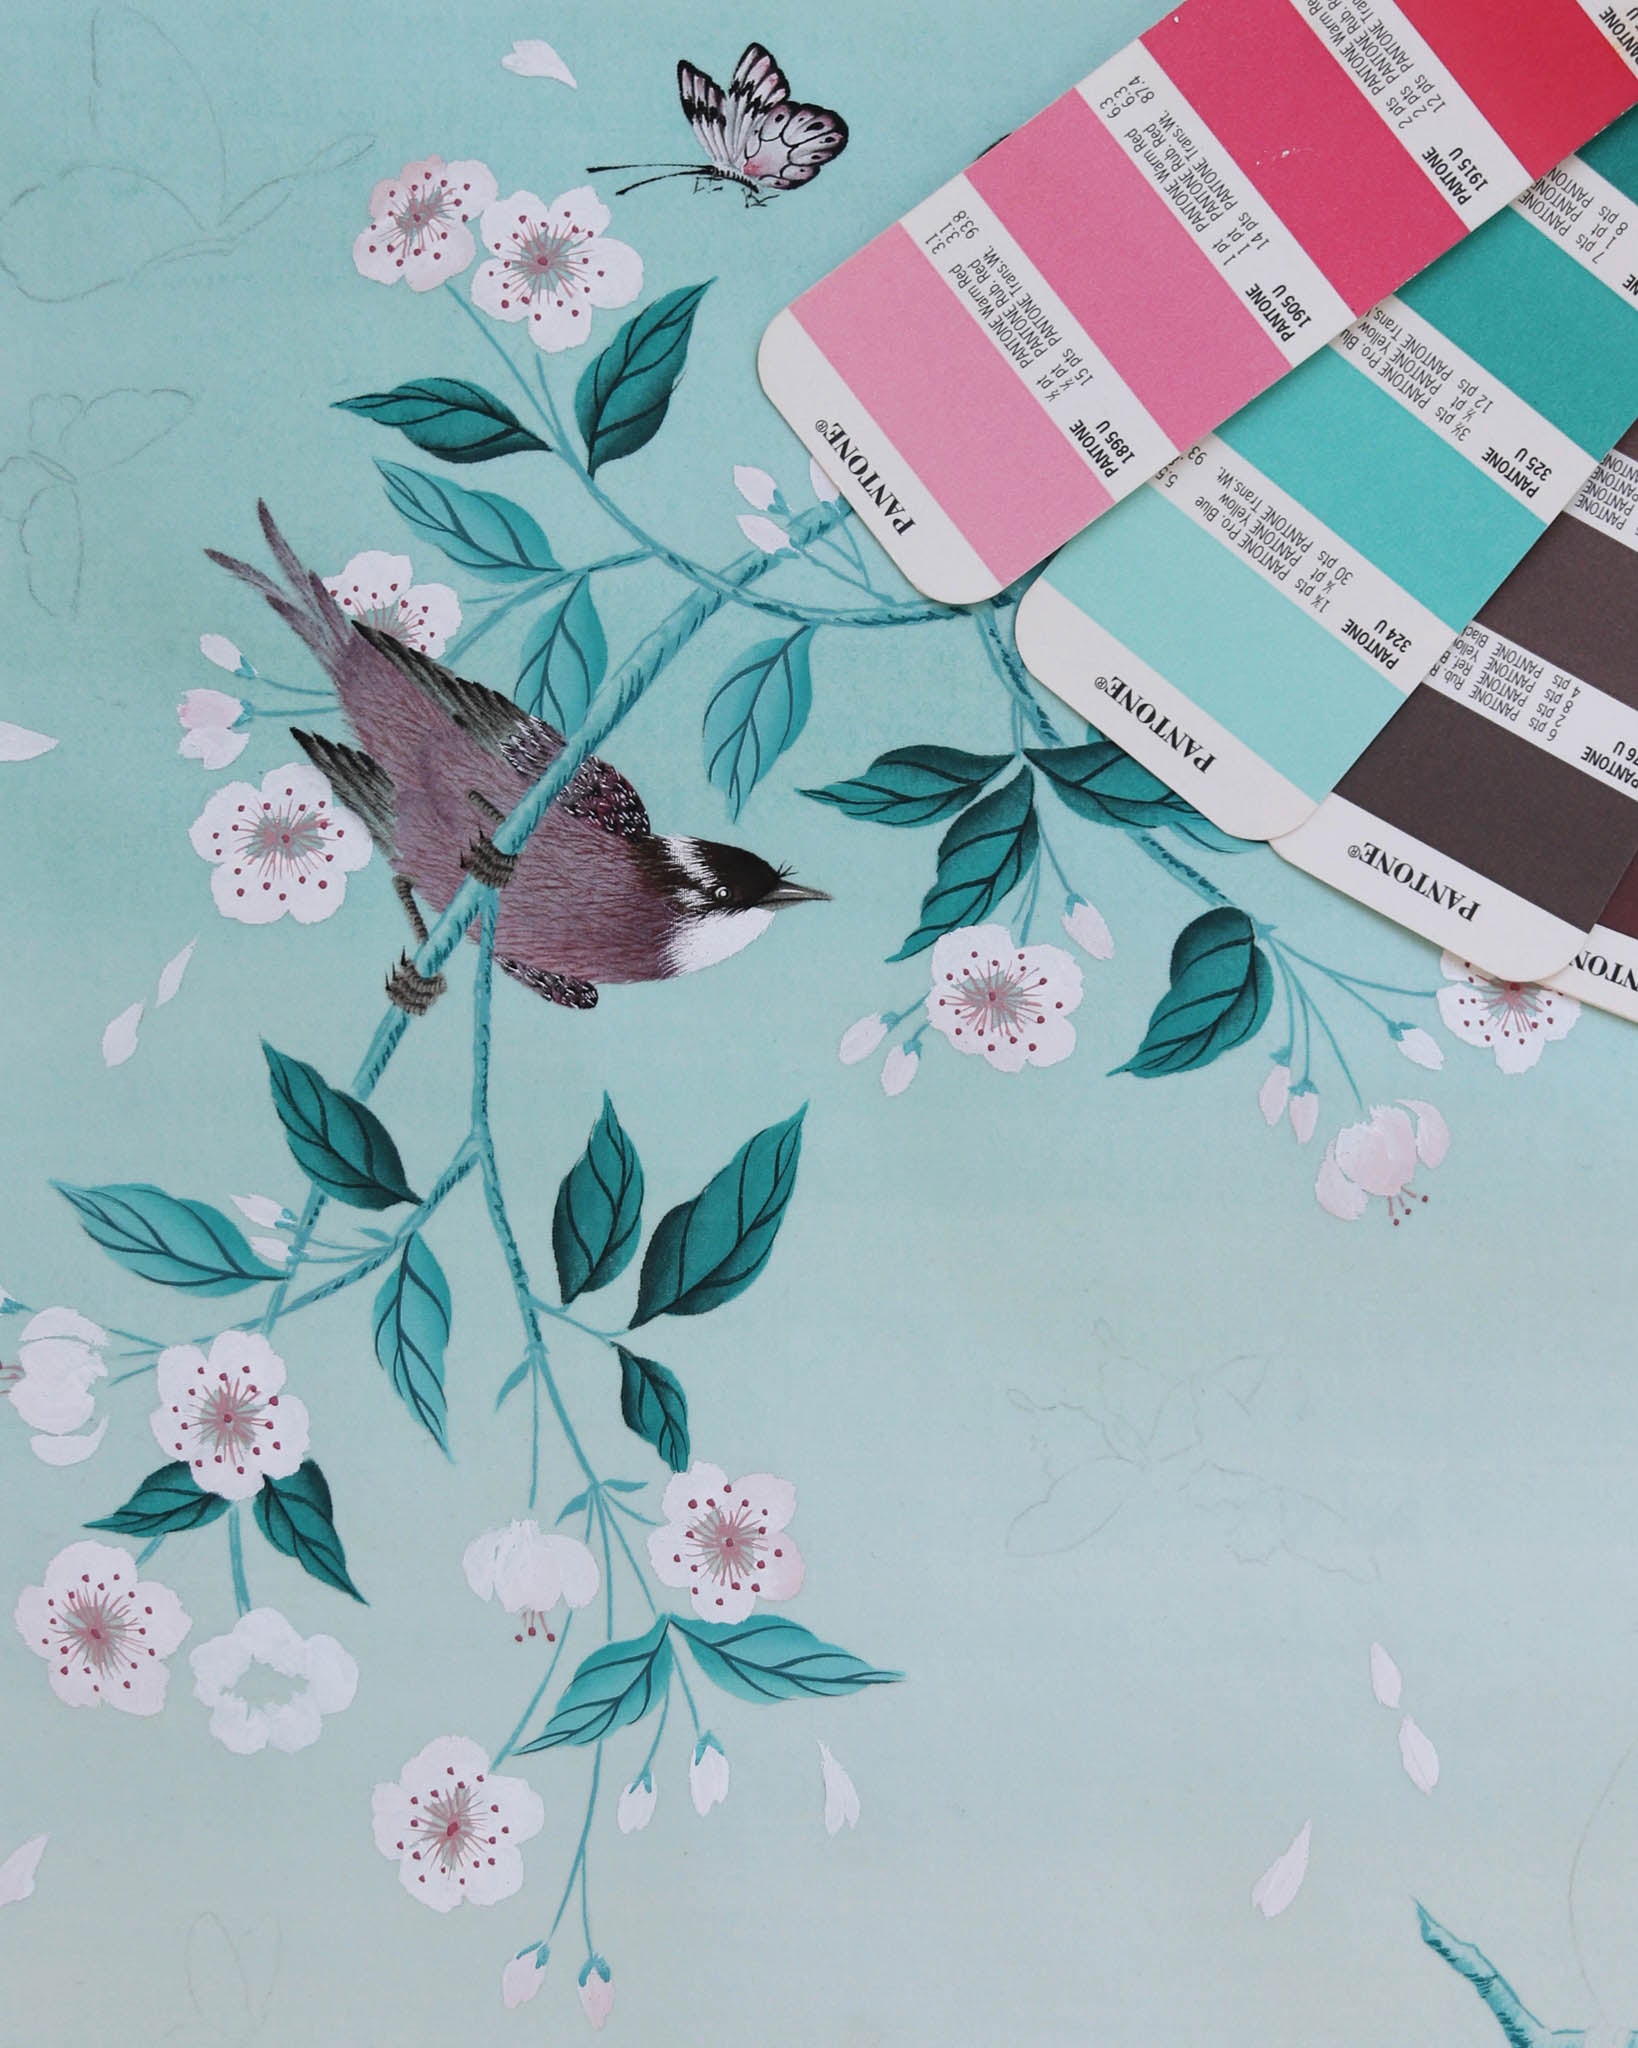 pantone paint colour swatch choices with diane hill's finished chinoiserie bird artwork